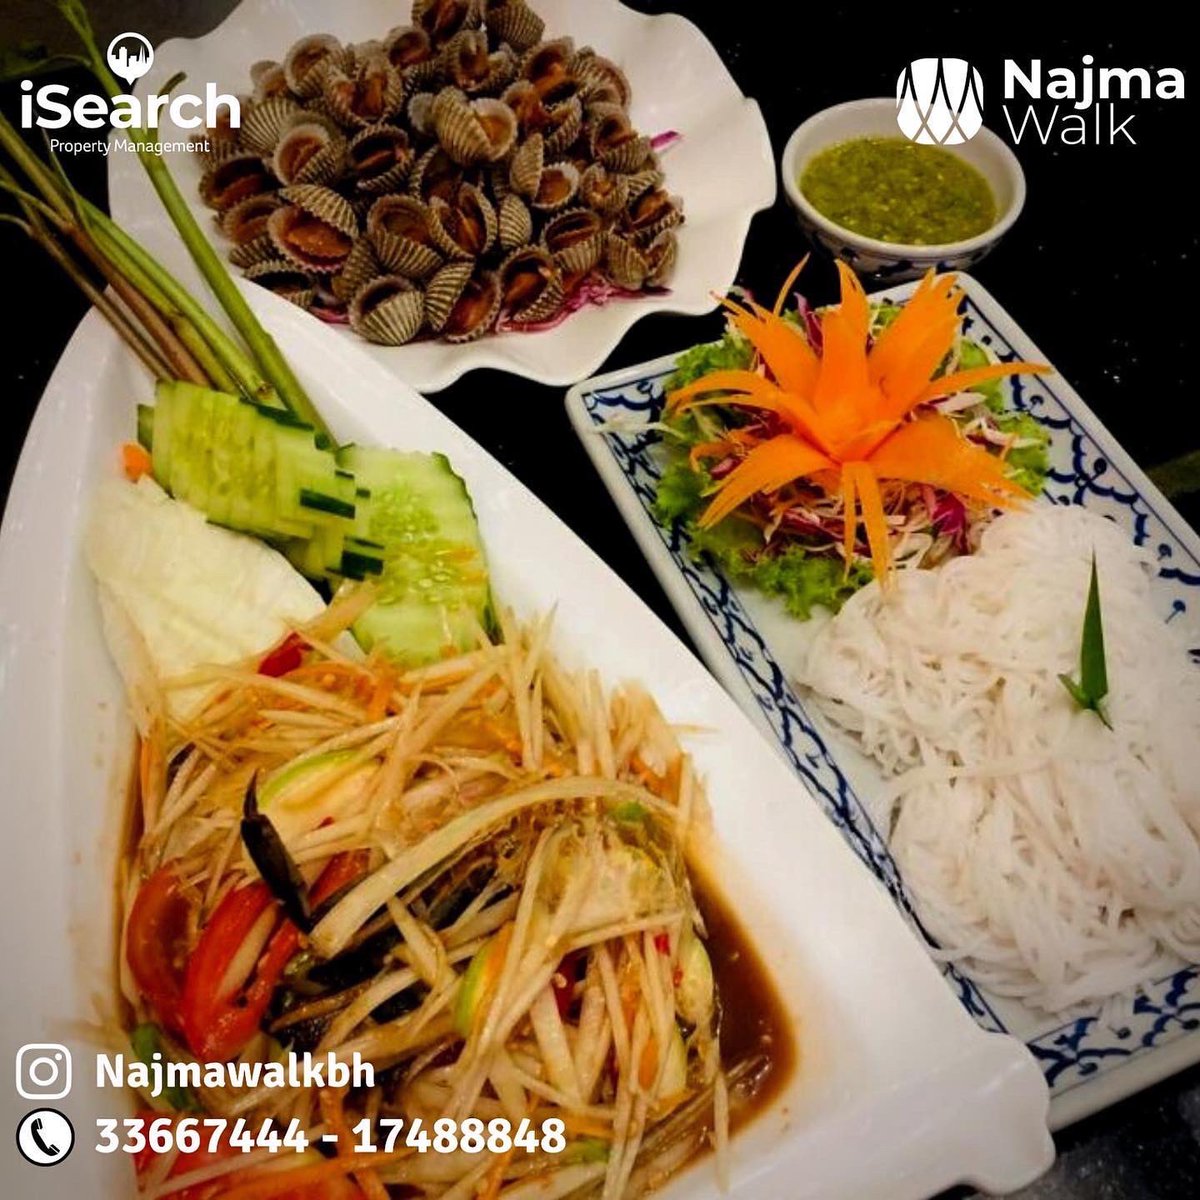 test Twitter Media - Every Thai Meal is a Snack Worth Drooling For..
Enjoy your favorite Thai Dishes at Thailand Gate Restaurant, Najma Walk, Juffair.
For leasing and Inquiries 
Call on  17488848- 33667444
- 
-
#burgers #food #fooddiary #cheese #bacon #grill #bahrain🇧🇭 #dessert #mcdonalds #thai https://t.co/hOXk06uwGV